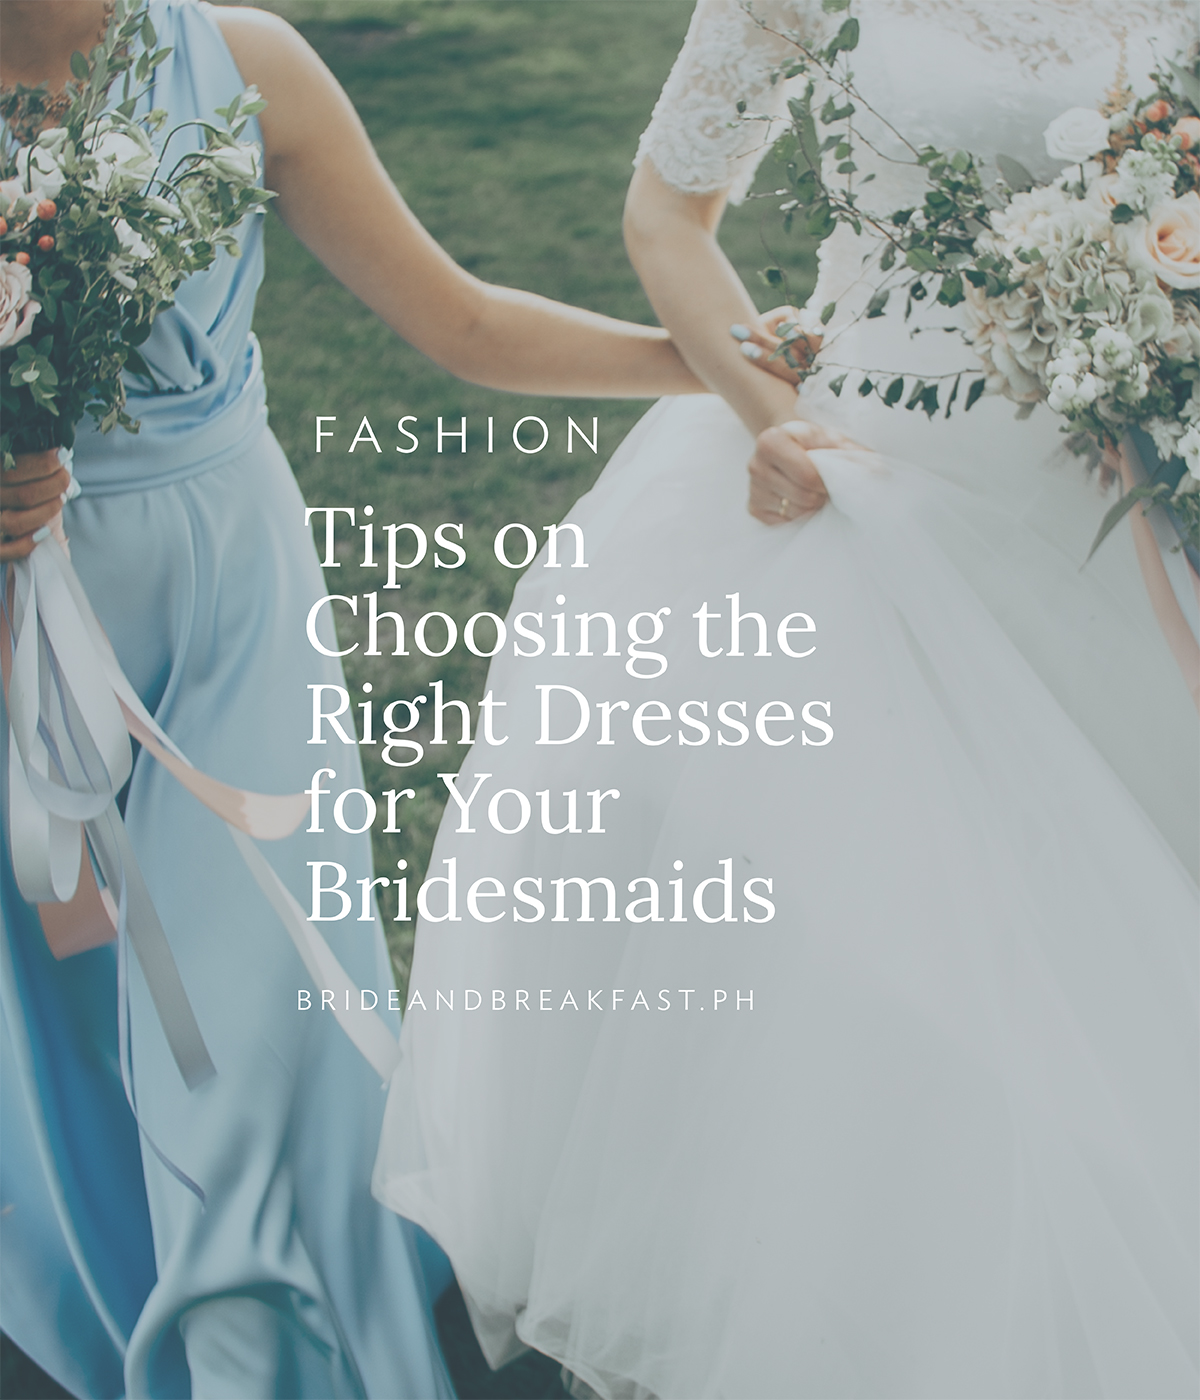 6 Tips on Choosing the Right Dresses for Your Bridesmaids